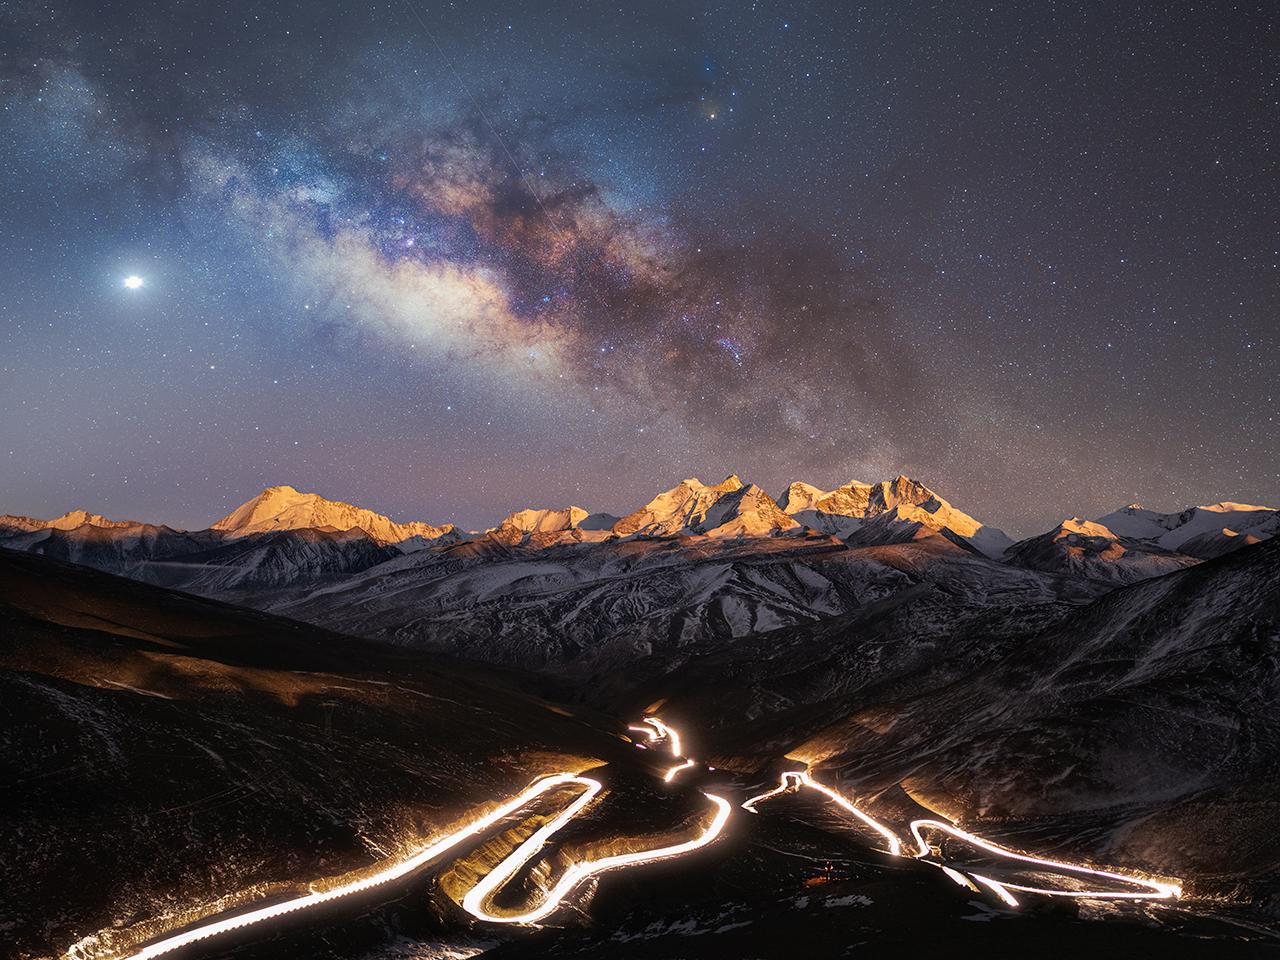 Long exposure of a long highway on a mountain with mountains and starry sky in the background